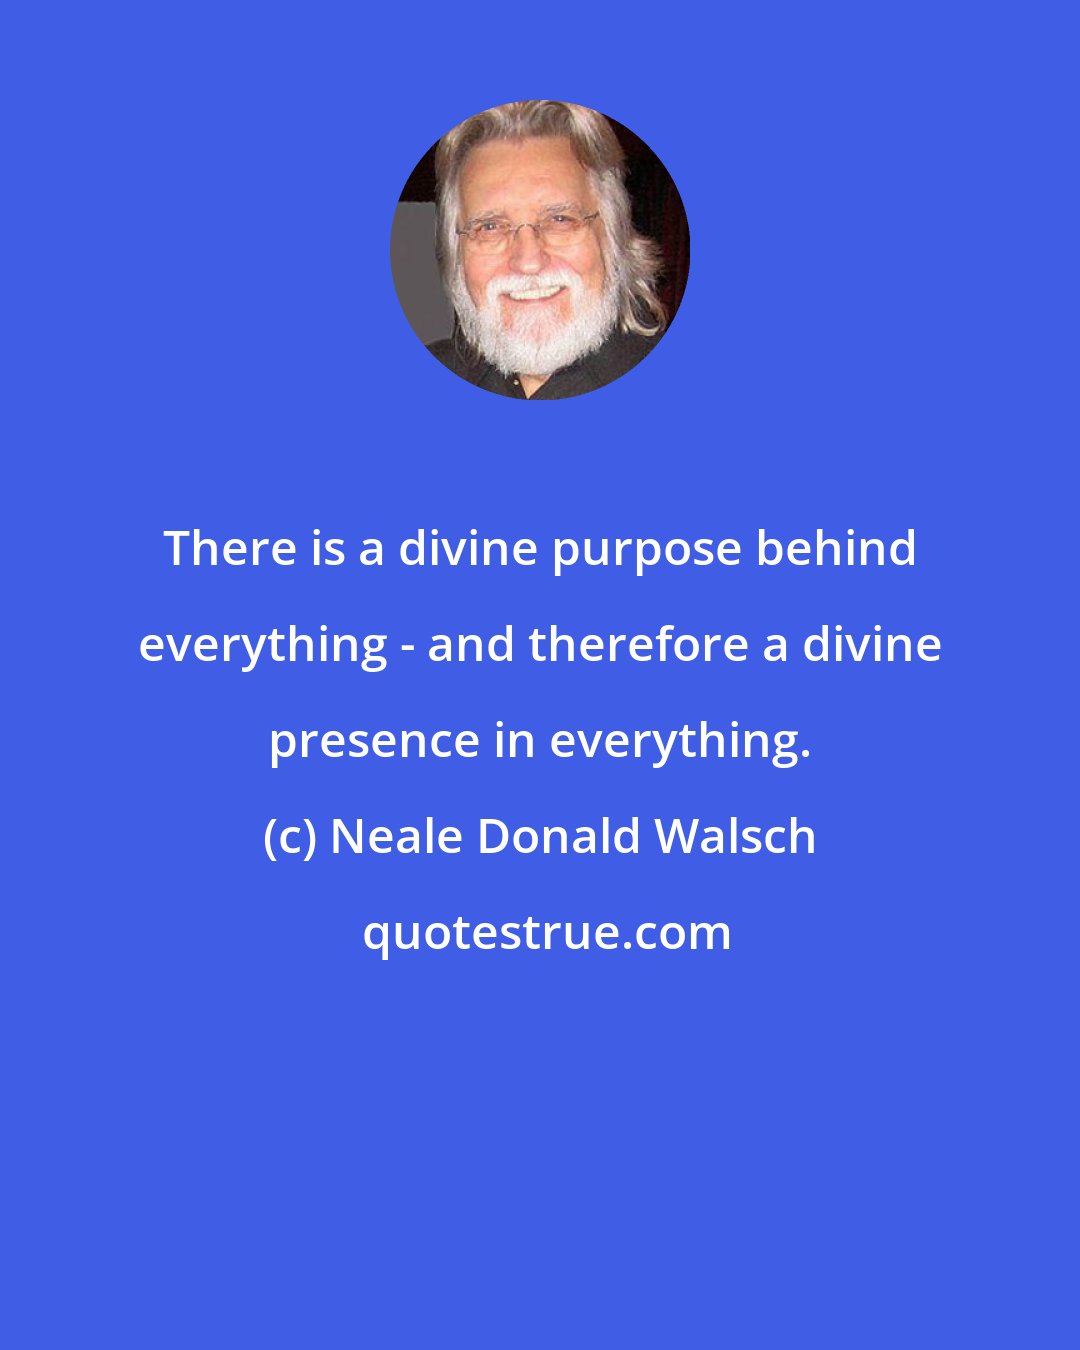 Neale Donald Walsch: There is a divine purpose behind everything - and therefore a divine presence in everything.